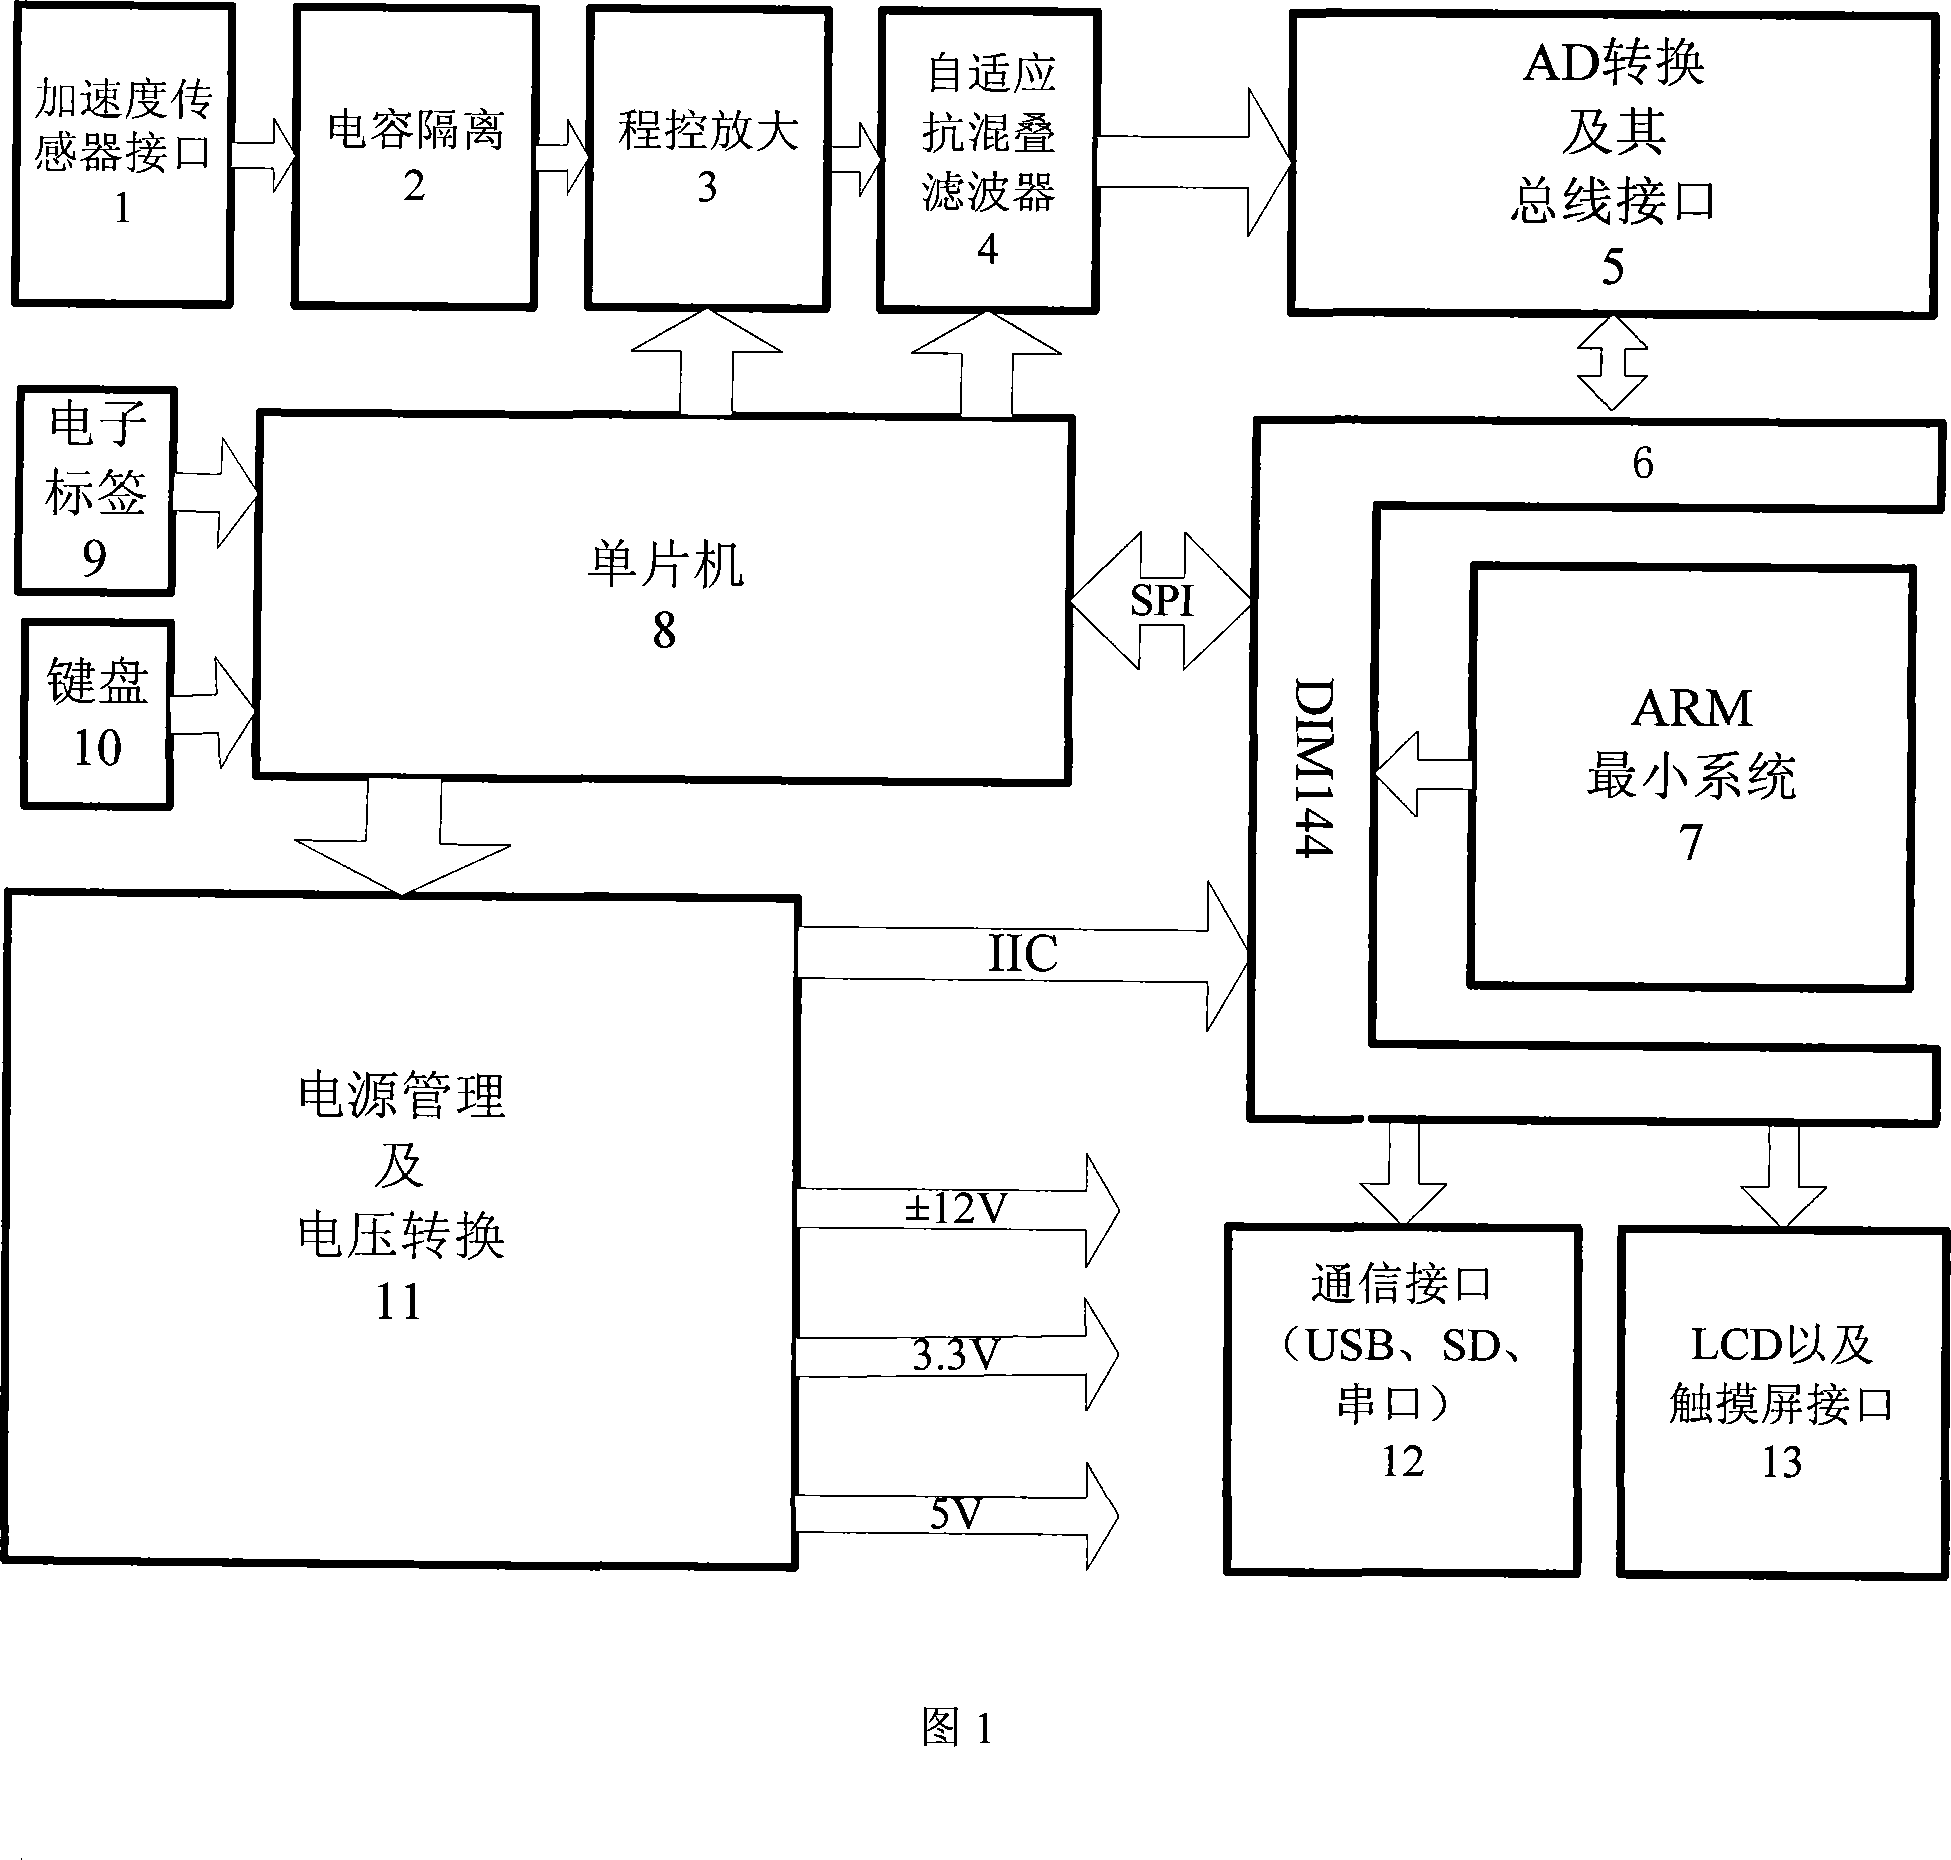 Portable vibration data collector and method based on embedded technology